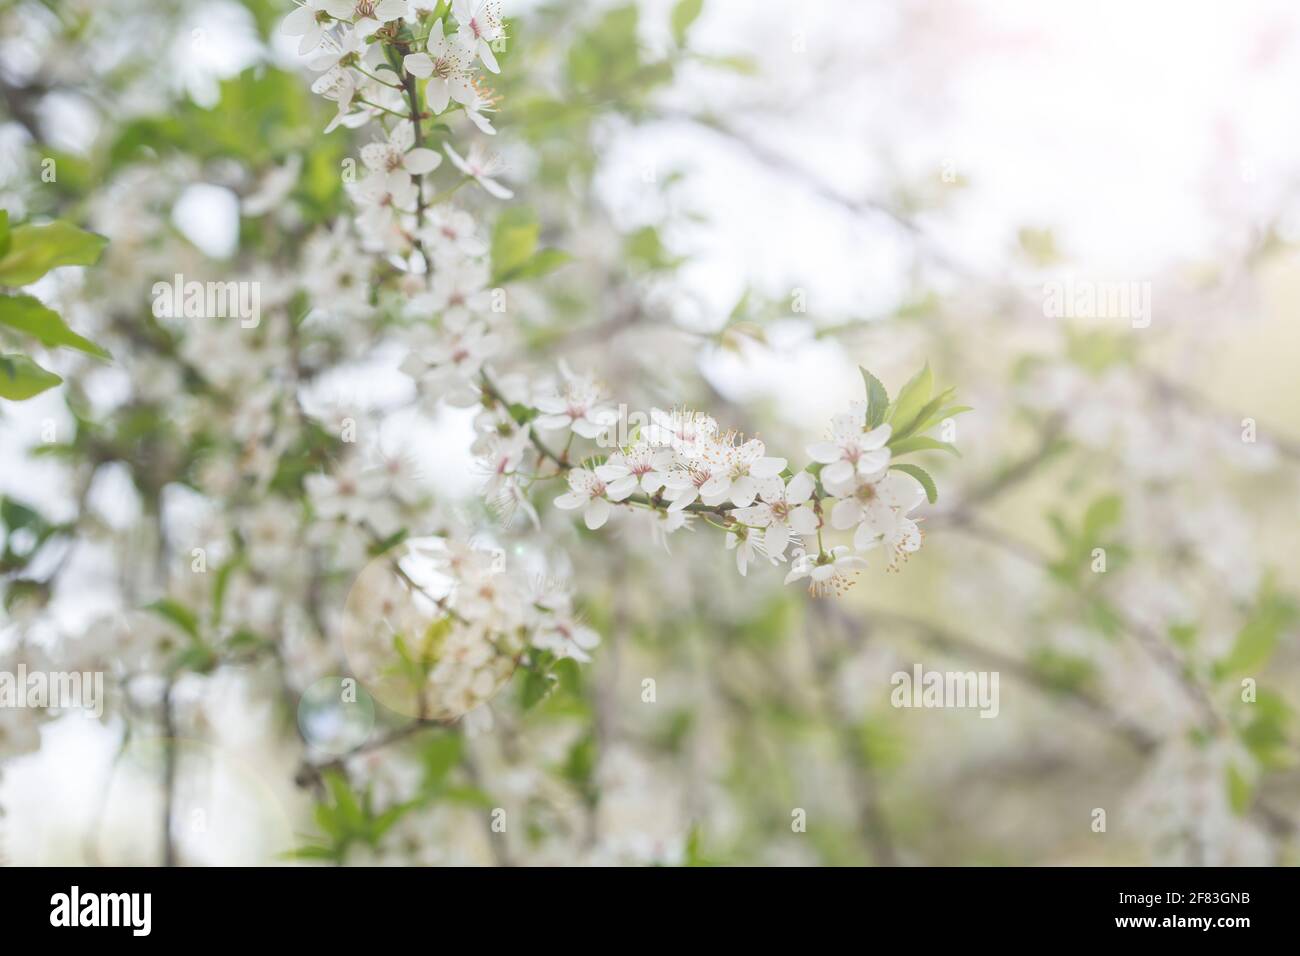 Prunus spinosa, called blackthorn or sloe, is a species of flowering plant in the rose family Rosaceae Stock Photo